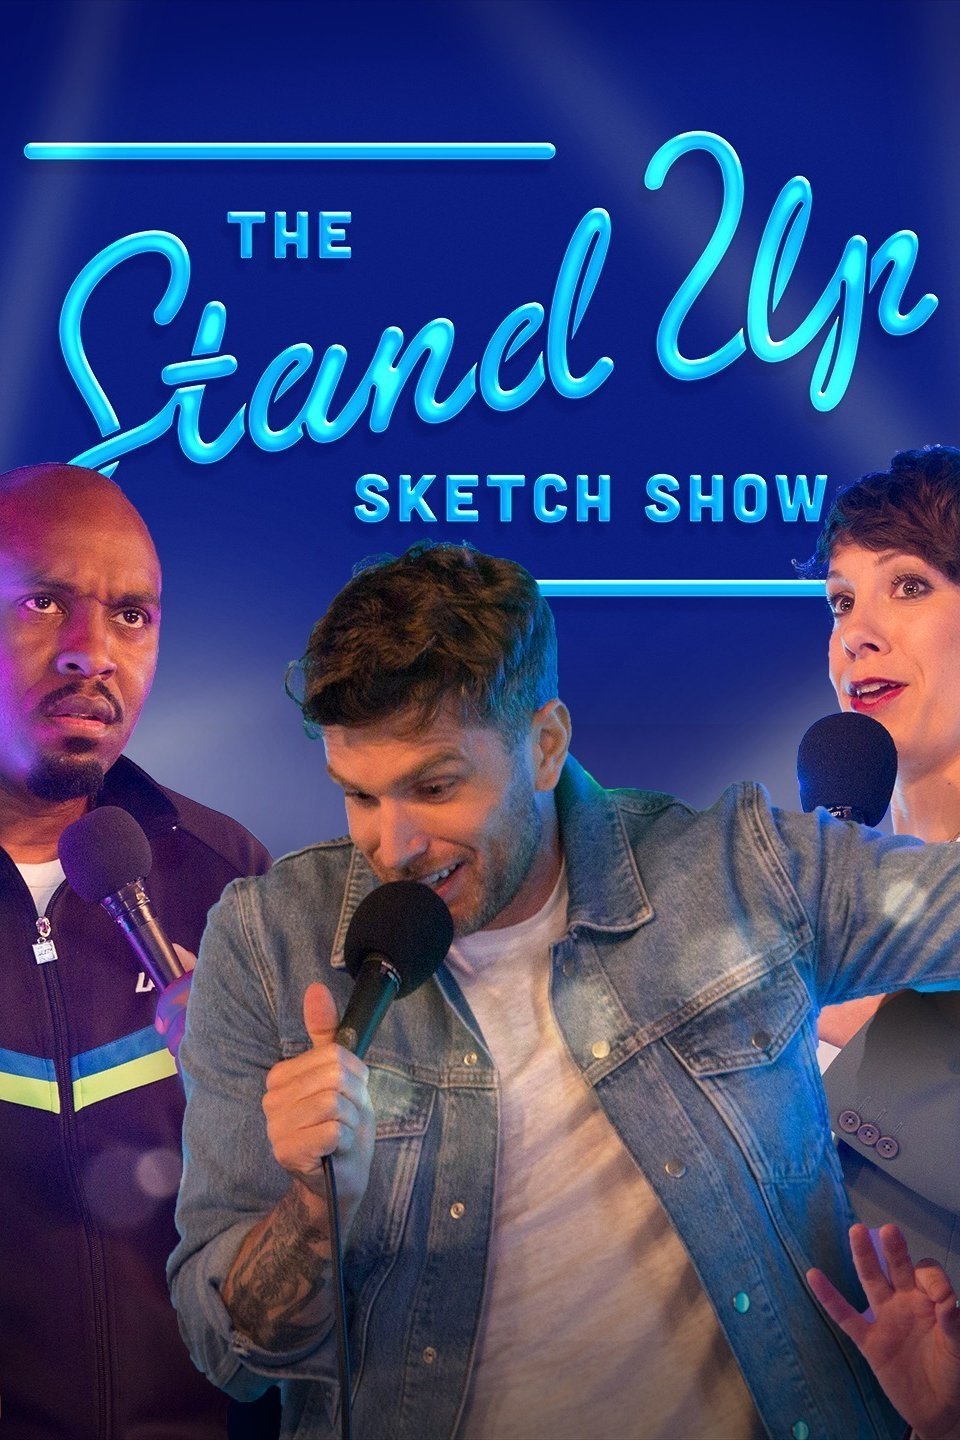 Sketchy at best: The worst Australian sketch comedy shows - Australian  Tumbleweeds